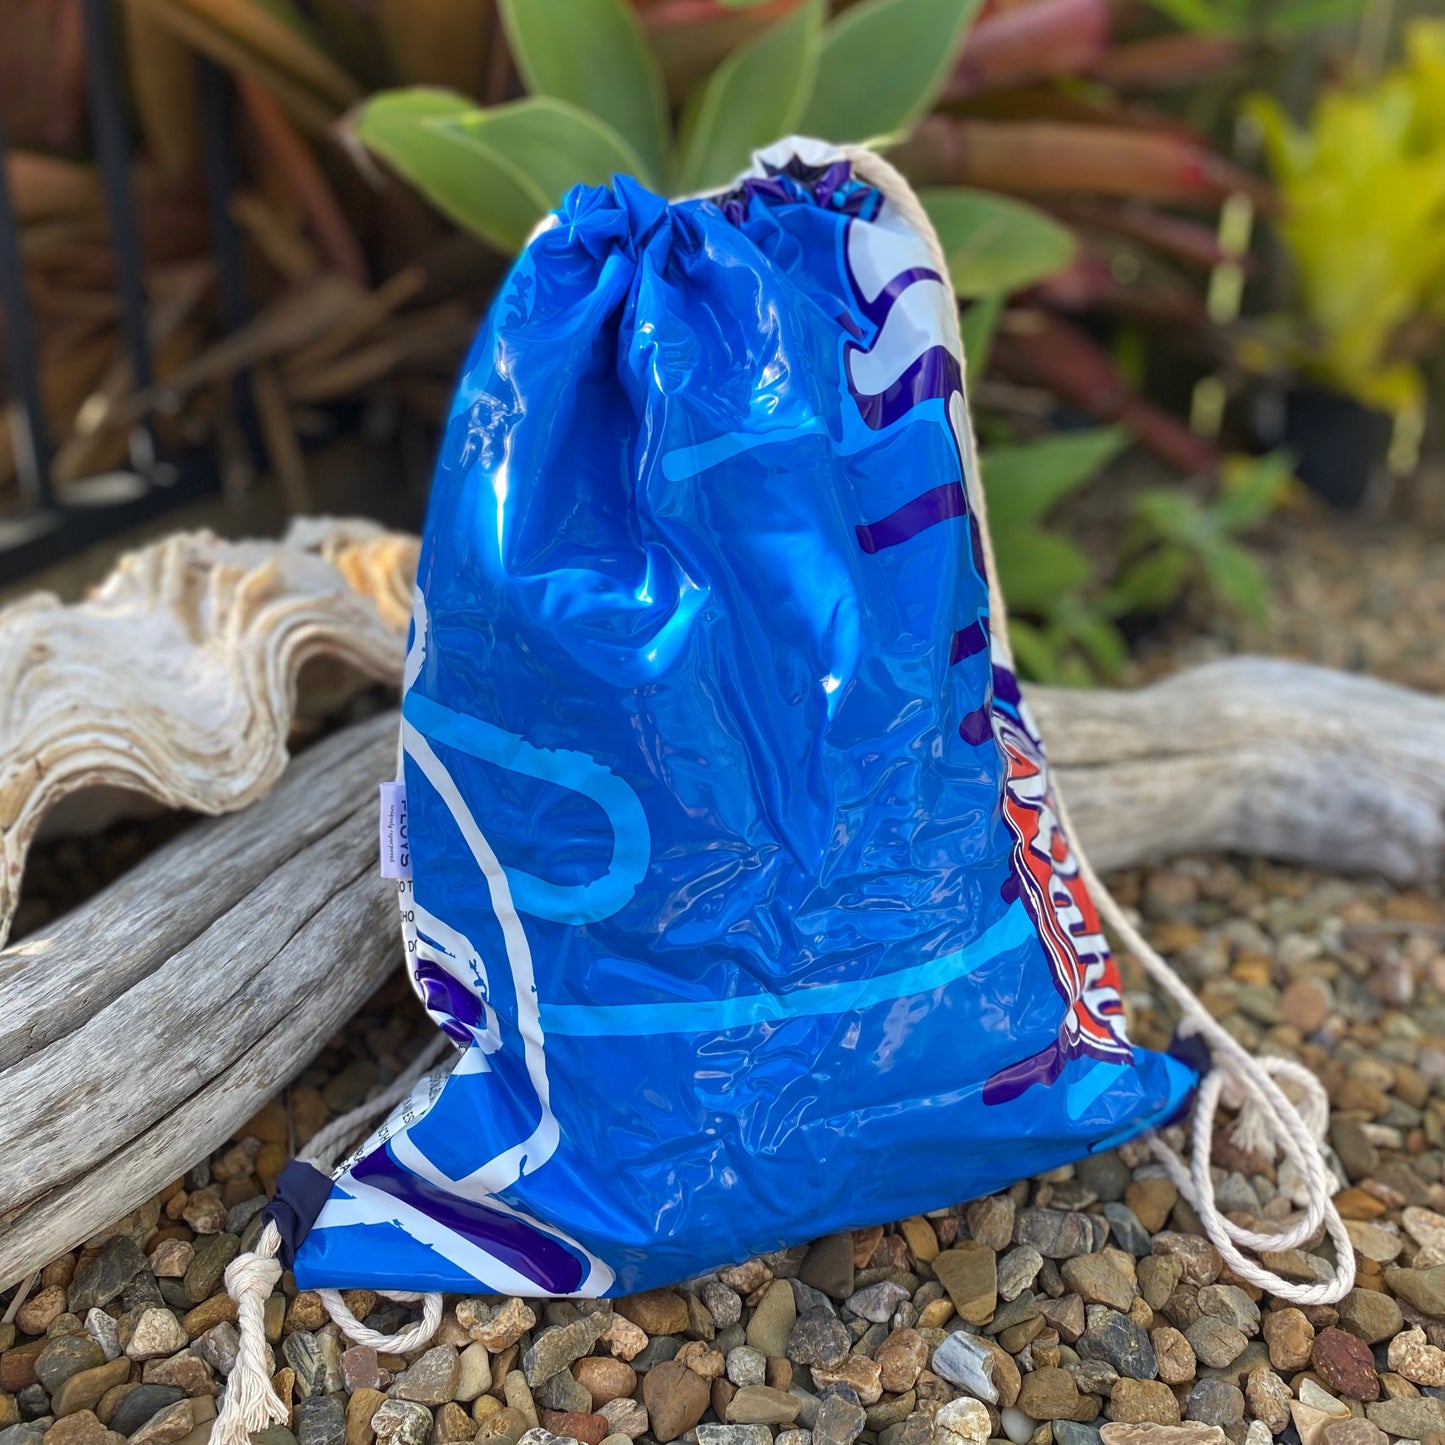 Swim bag made from recycled pool inflatables, lined with ripstop fabric. Perfect water resistant bag for swimming, sports and shop. Made from recycled PVC